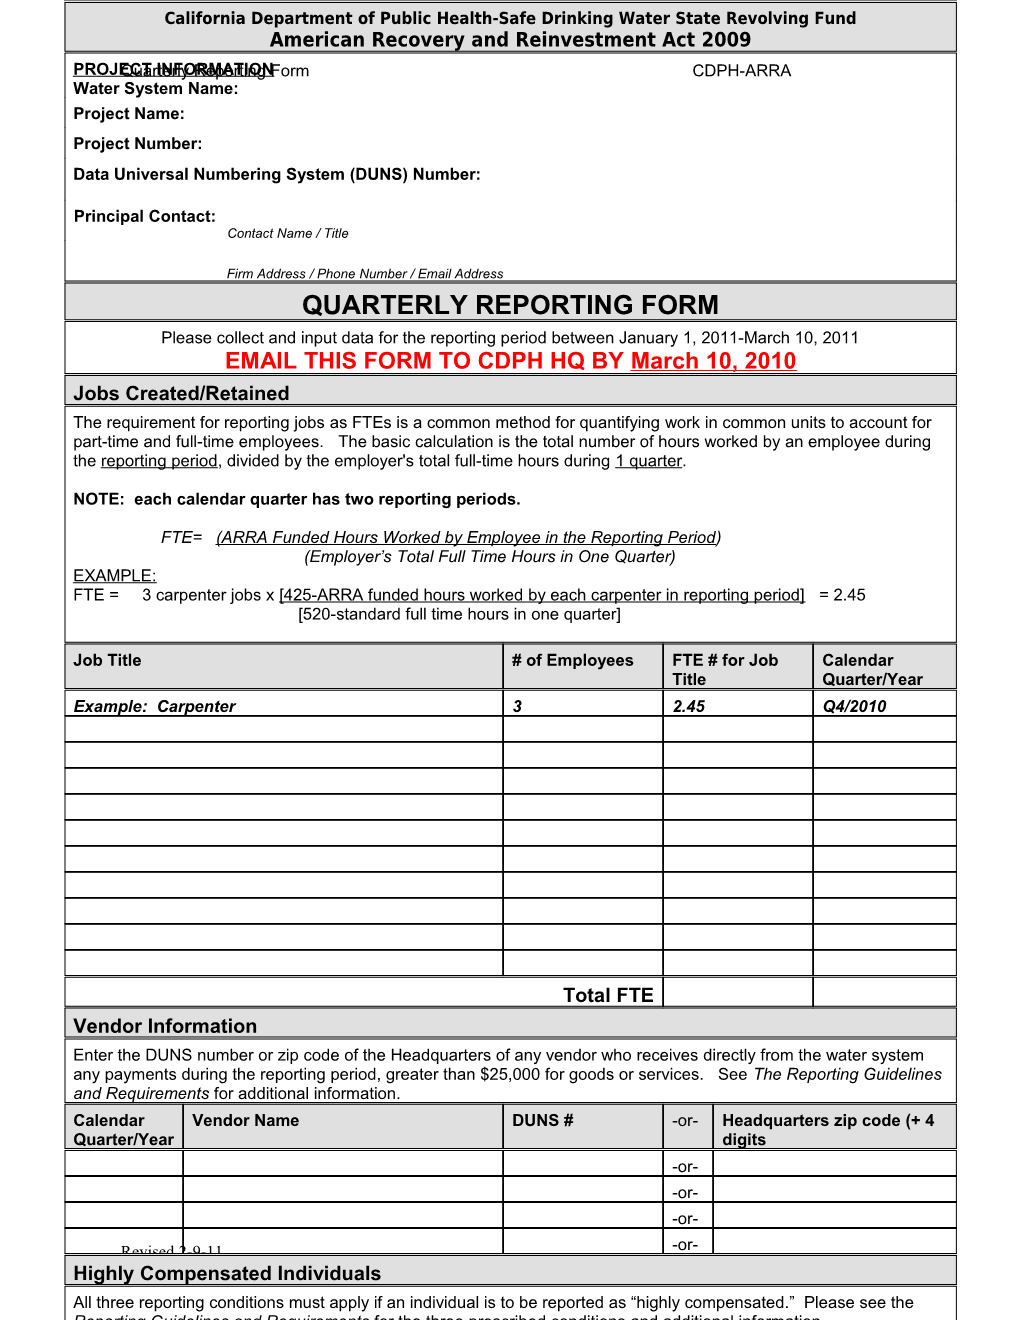 (FINAL) REPORTING-Quarterly Reporting Form REVISED 2-9-11